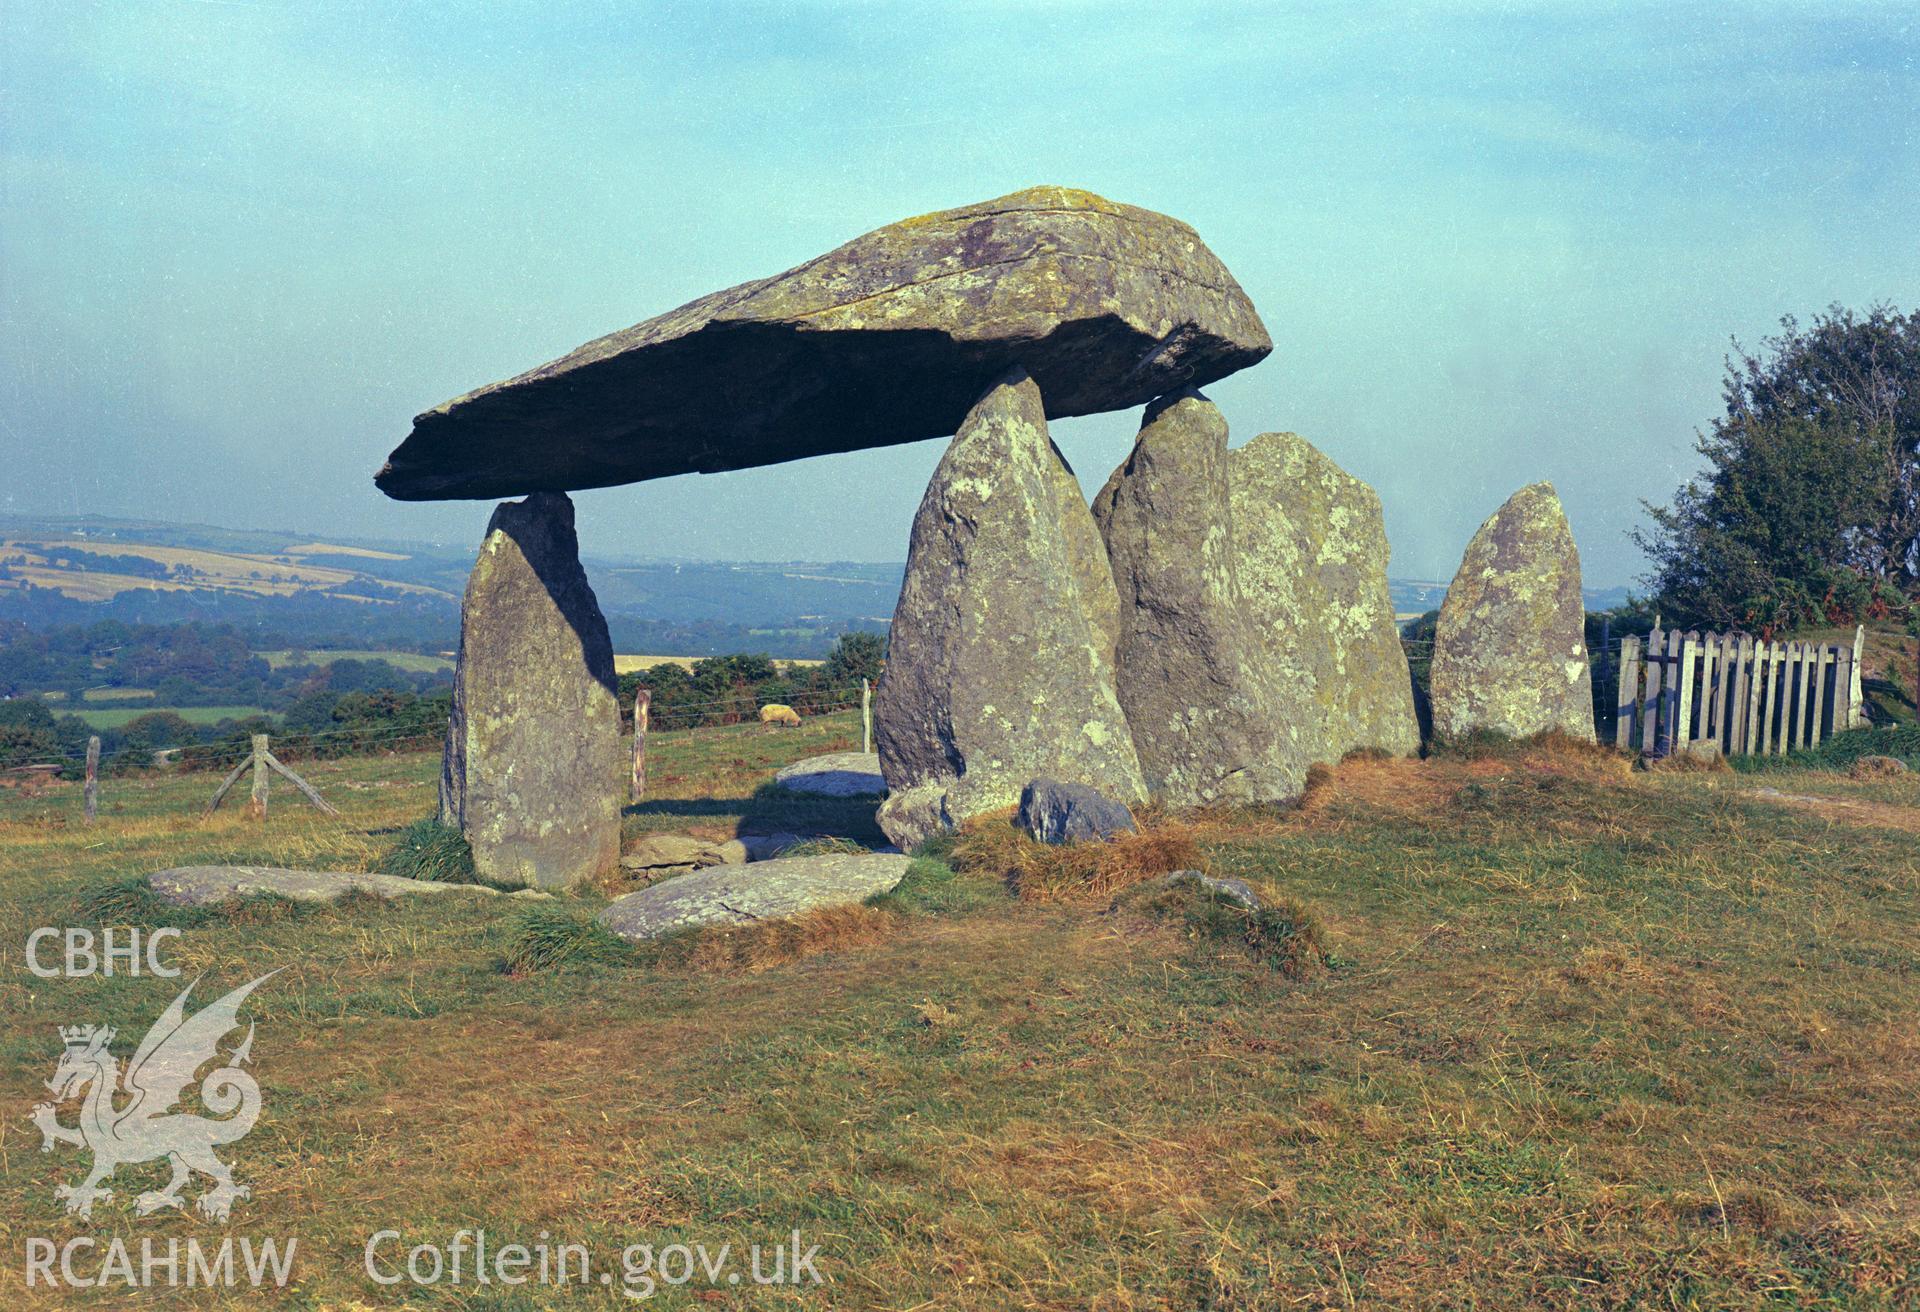 Digital copy of a colour negative showing view of Pentre Ifan Cromlech, taken by RCAHMW.